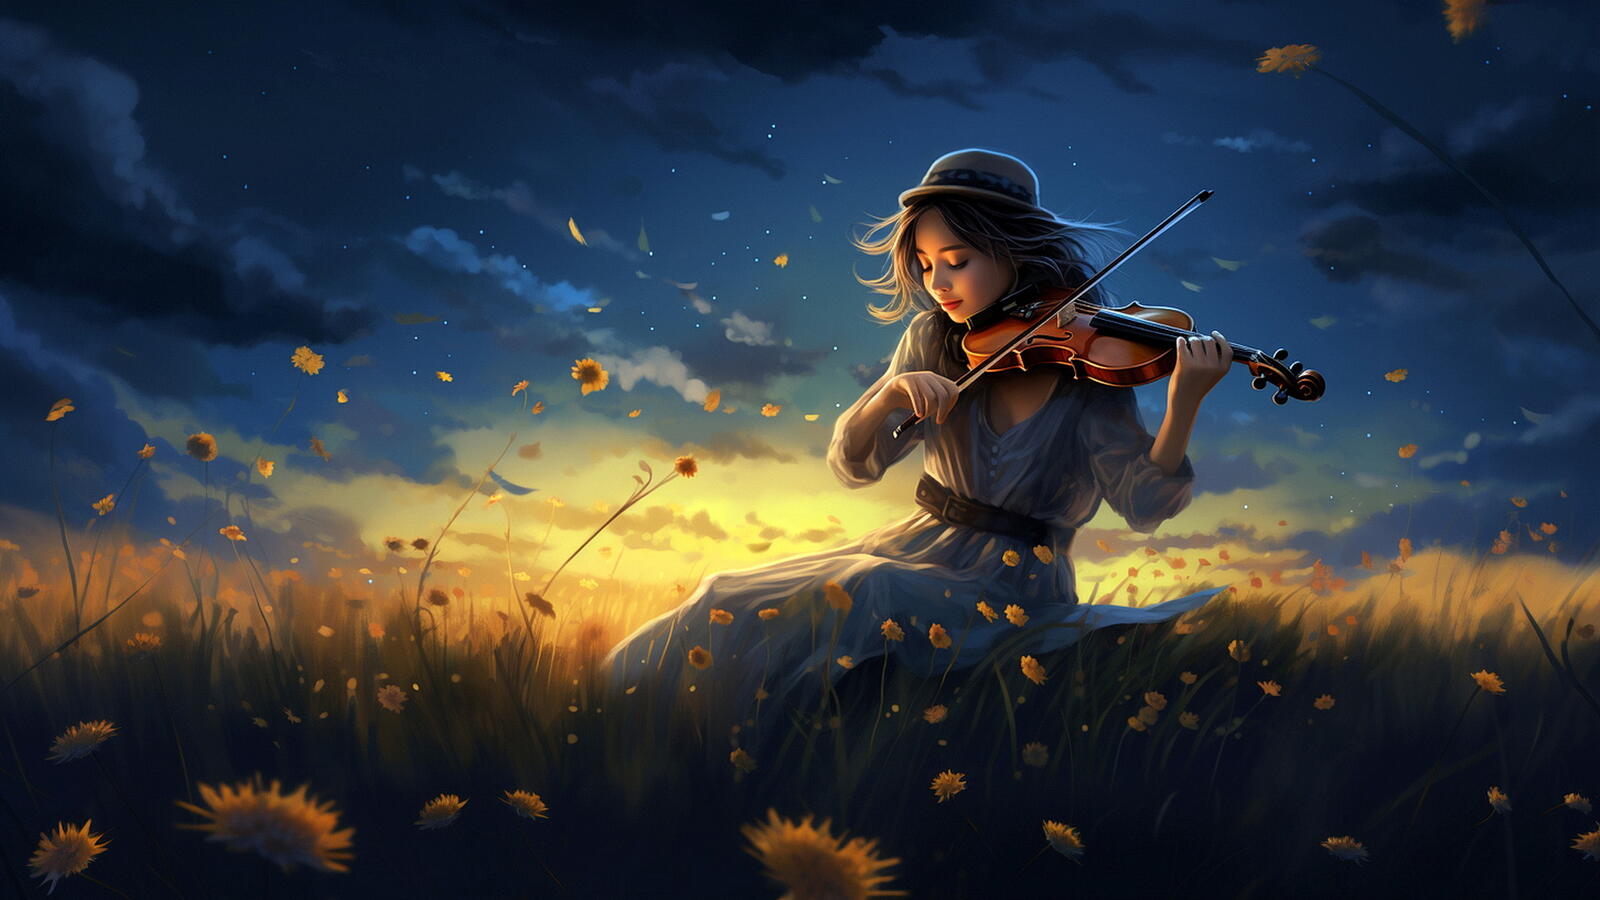 Free photo A girl playing violin in a field